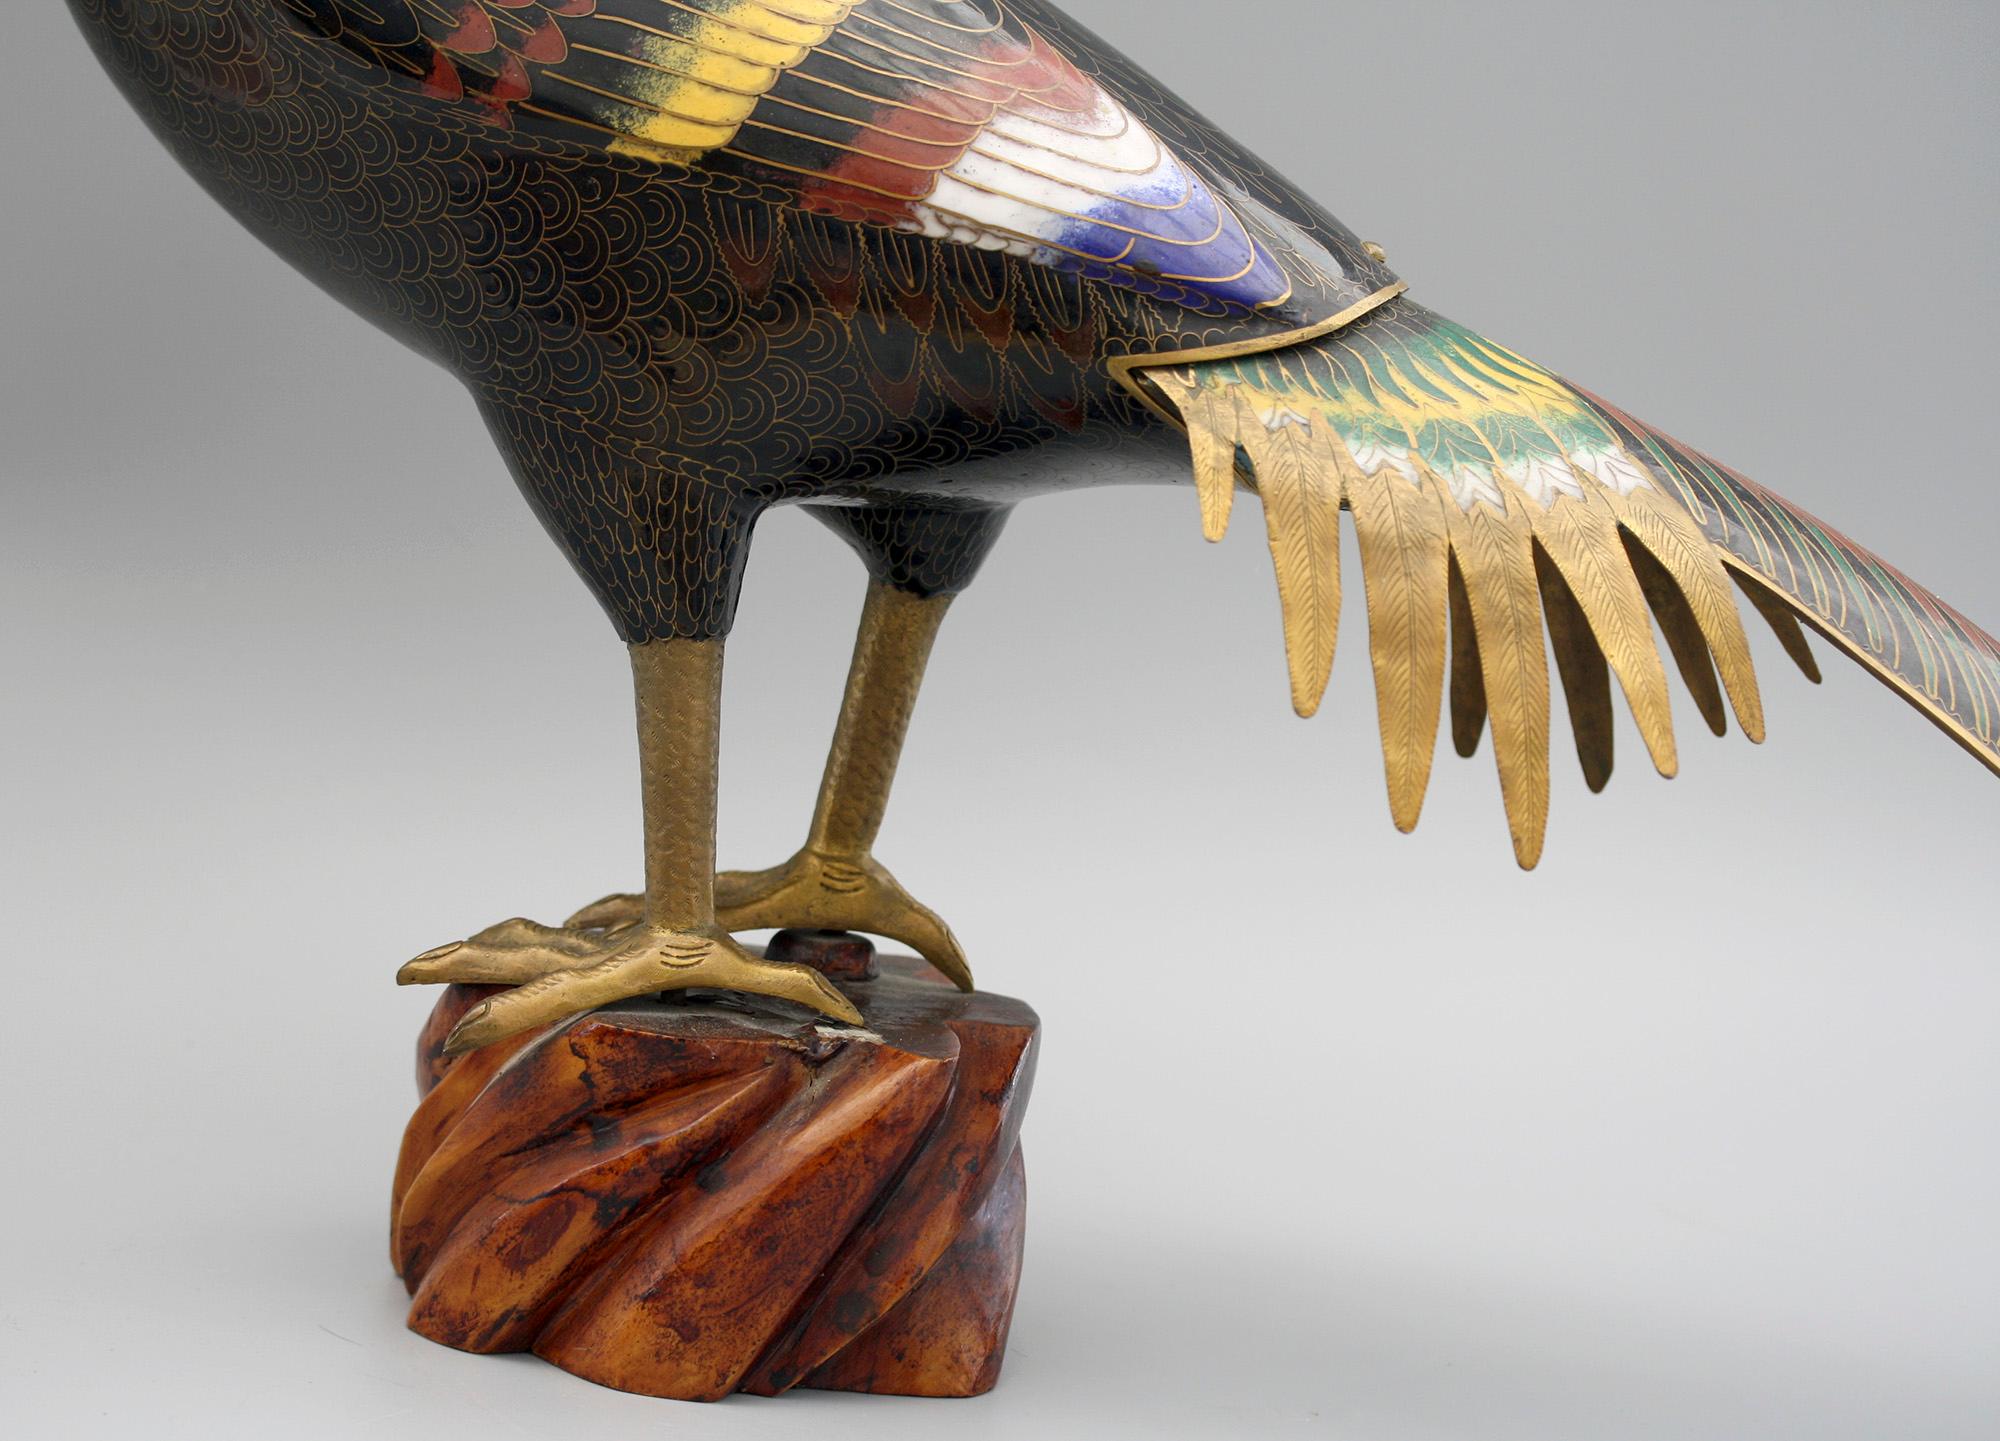 An exceptional and large Chinese vintage cloisonne enamel male pheasant mounted on a wooden stand dating from the first half of the 20th century. The pheasant stands on a shaped wooden block with brass claws, and a black enameled body with bright